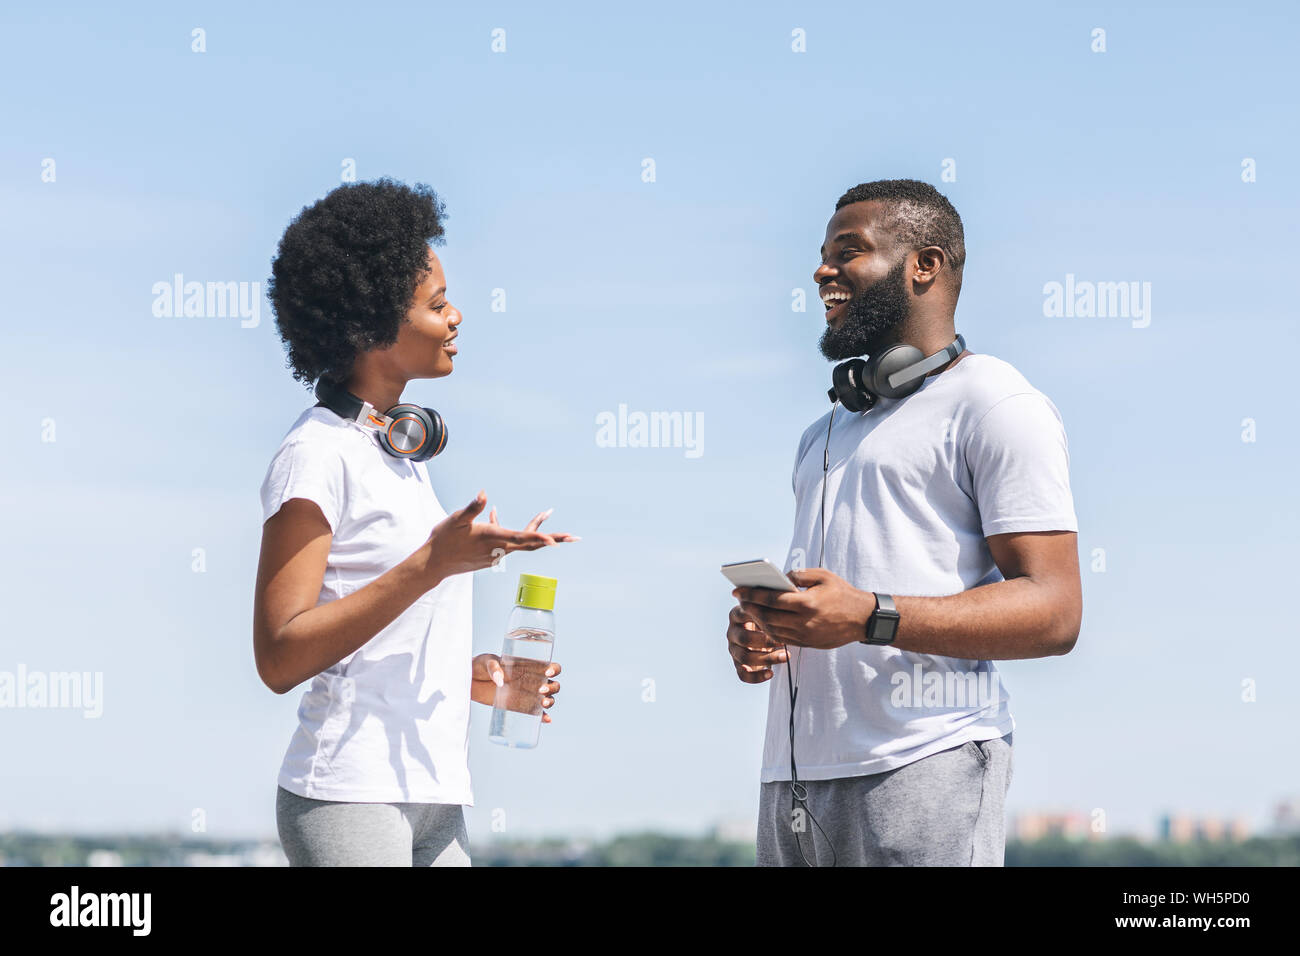 Couple Talking About Running Training Plan Near River Stock Photo